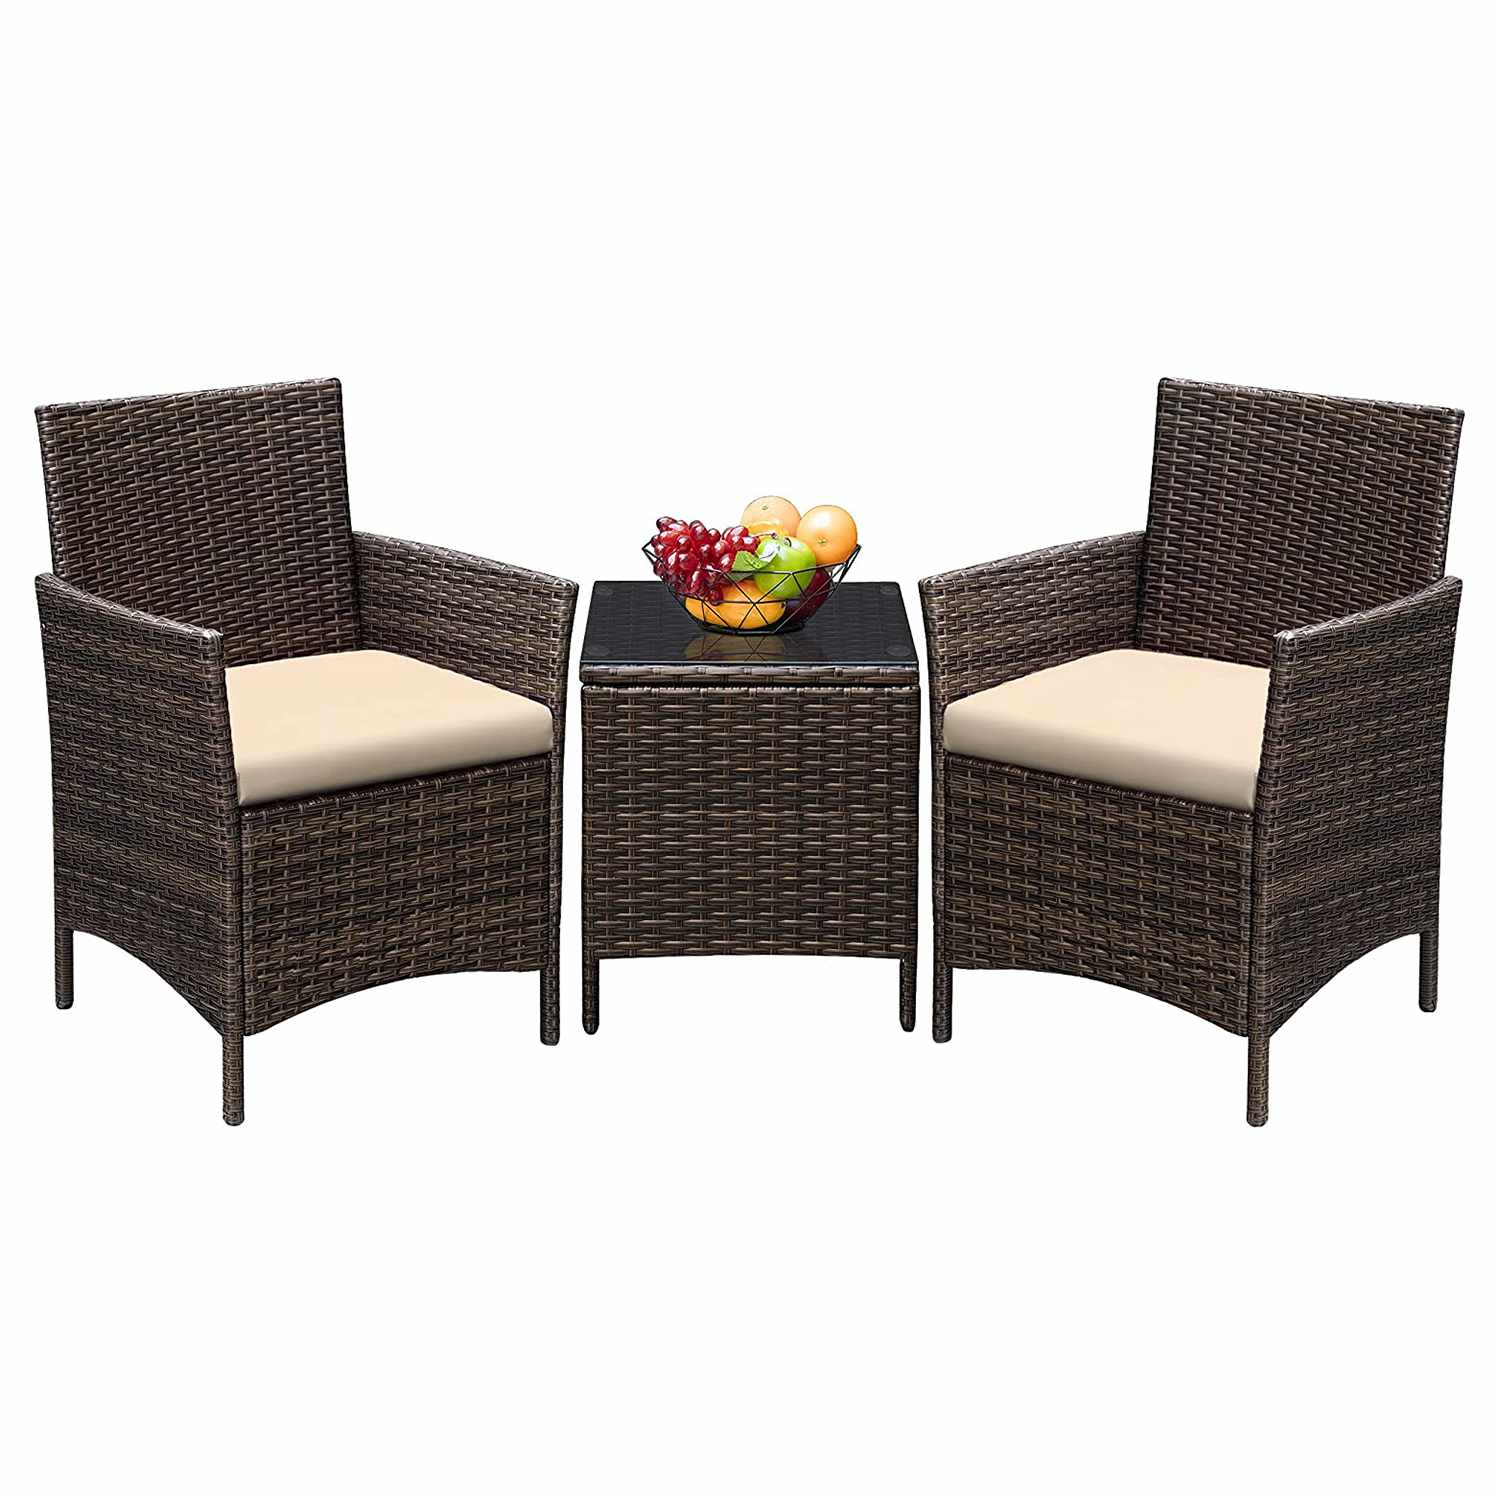 Roundup of Early Prime Day Patio Furniture Deals